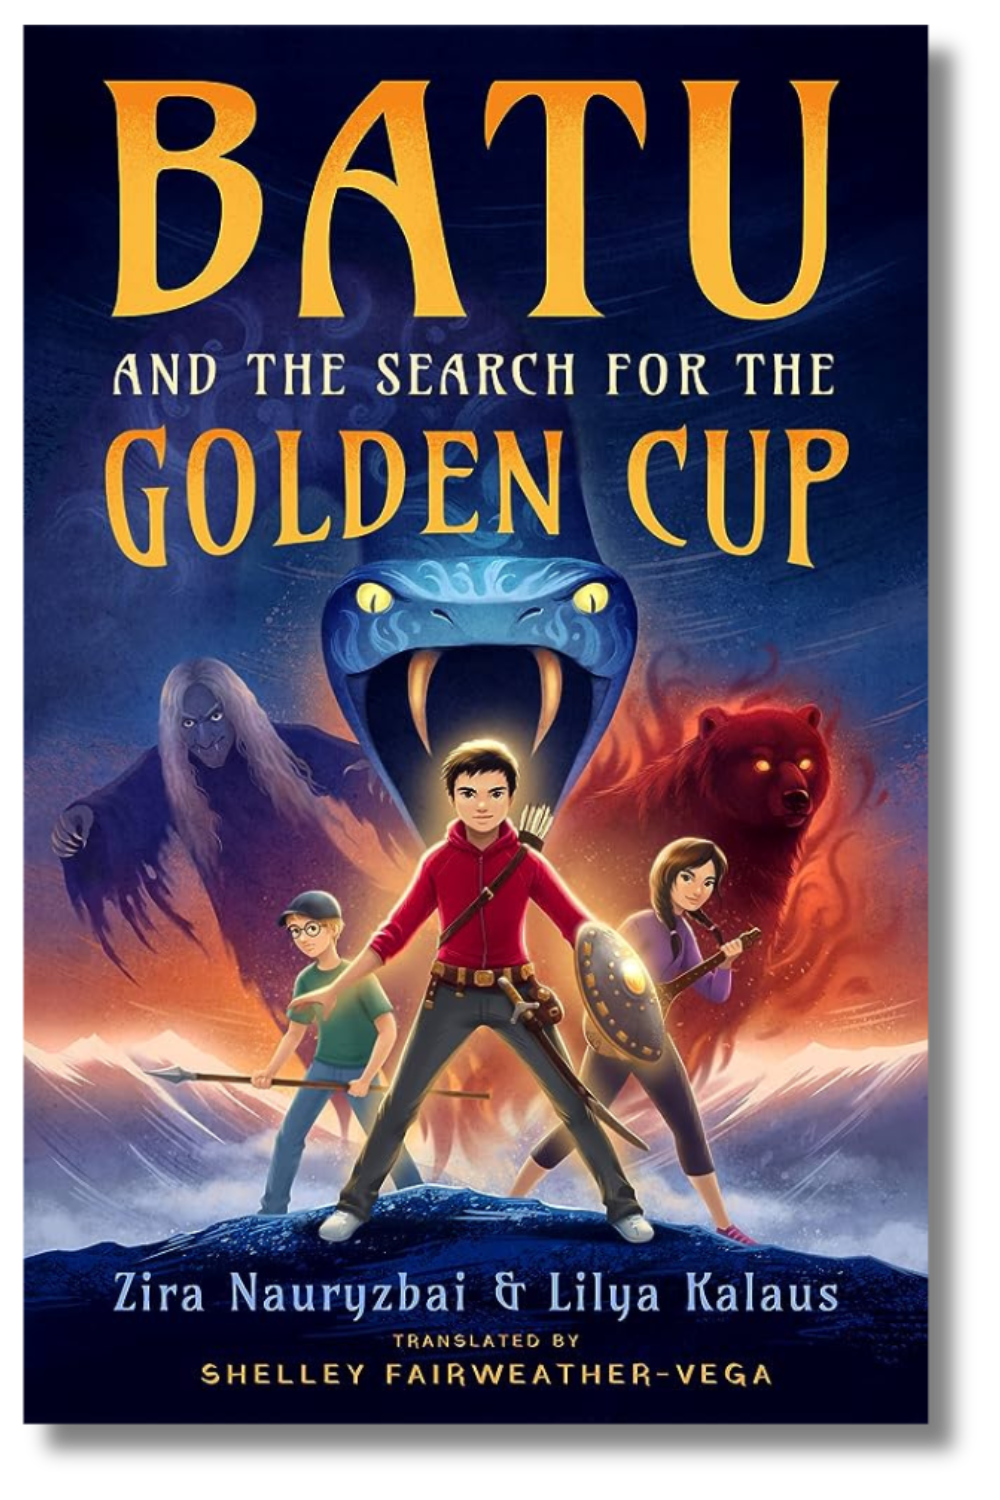 The cover of "Batu and the Search for the Golden Cup" by Zira Nauryzbai and Lilya Kalaus